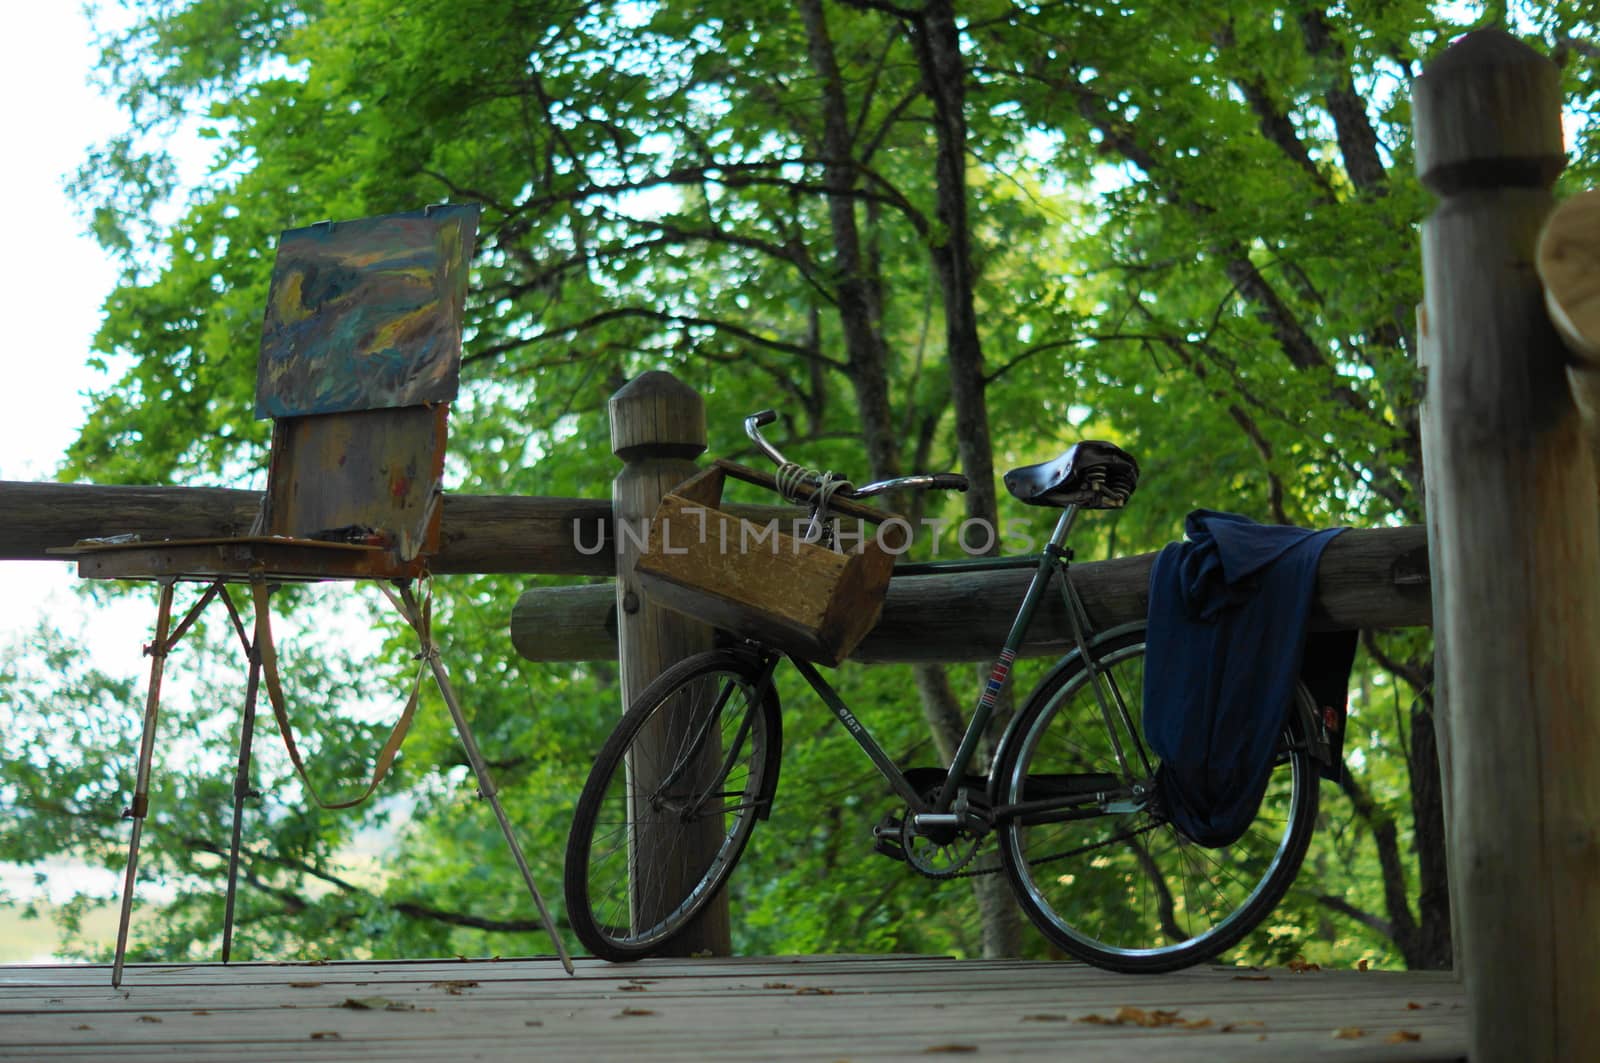 Painting canvas on tripod under tree with bicycle